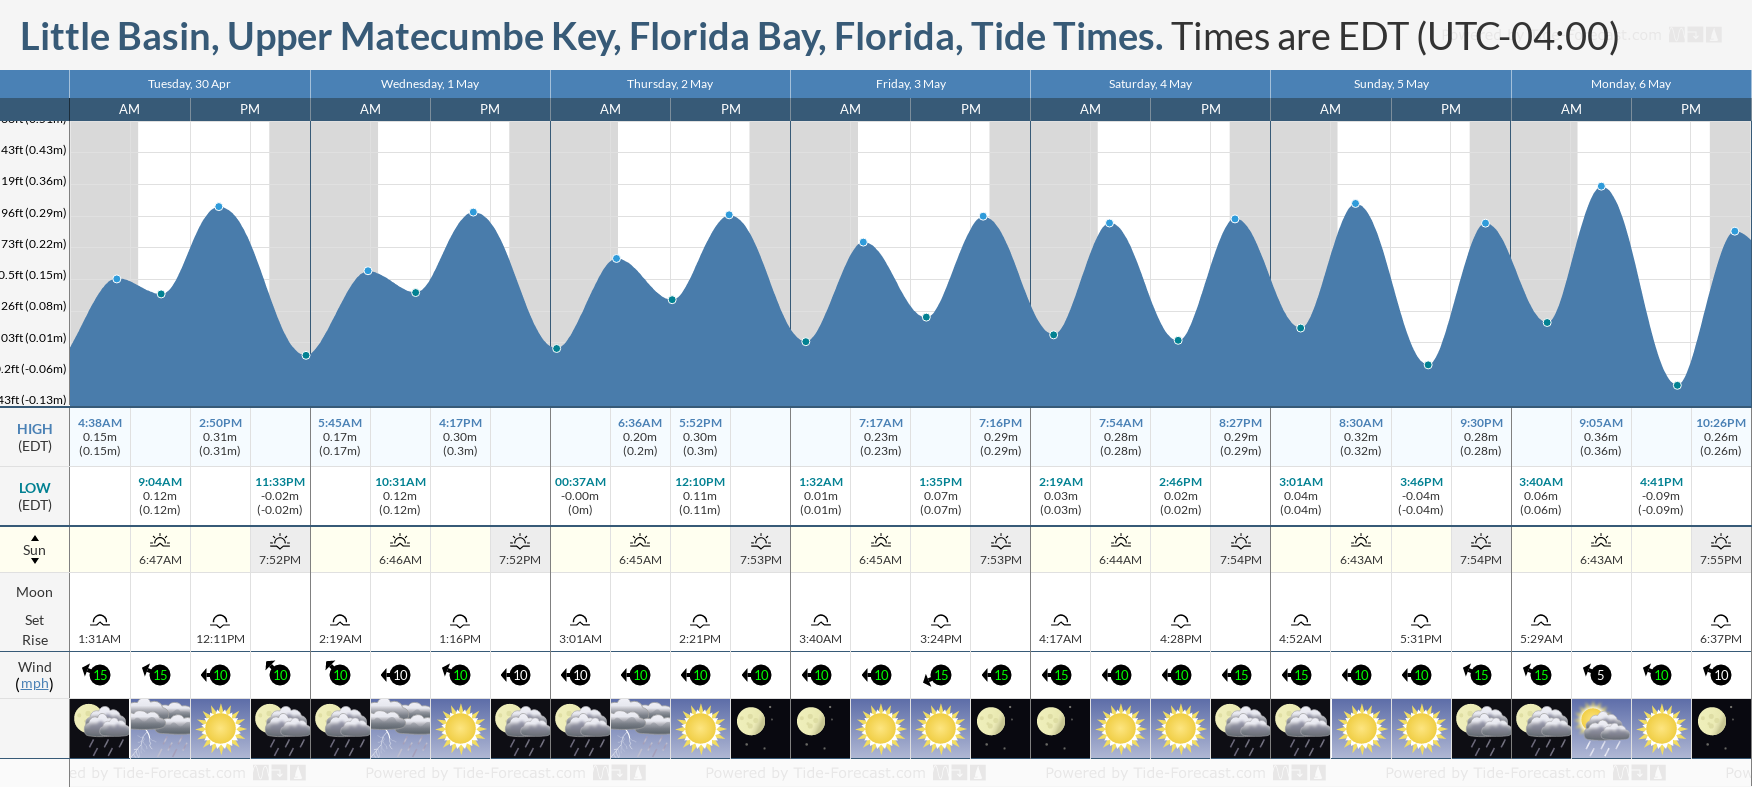 Little Basin, Upper Matecumbe Key, Florida Bay, Florida Tide Chart including high and low tide times for the next 7 days